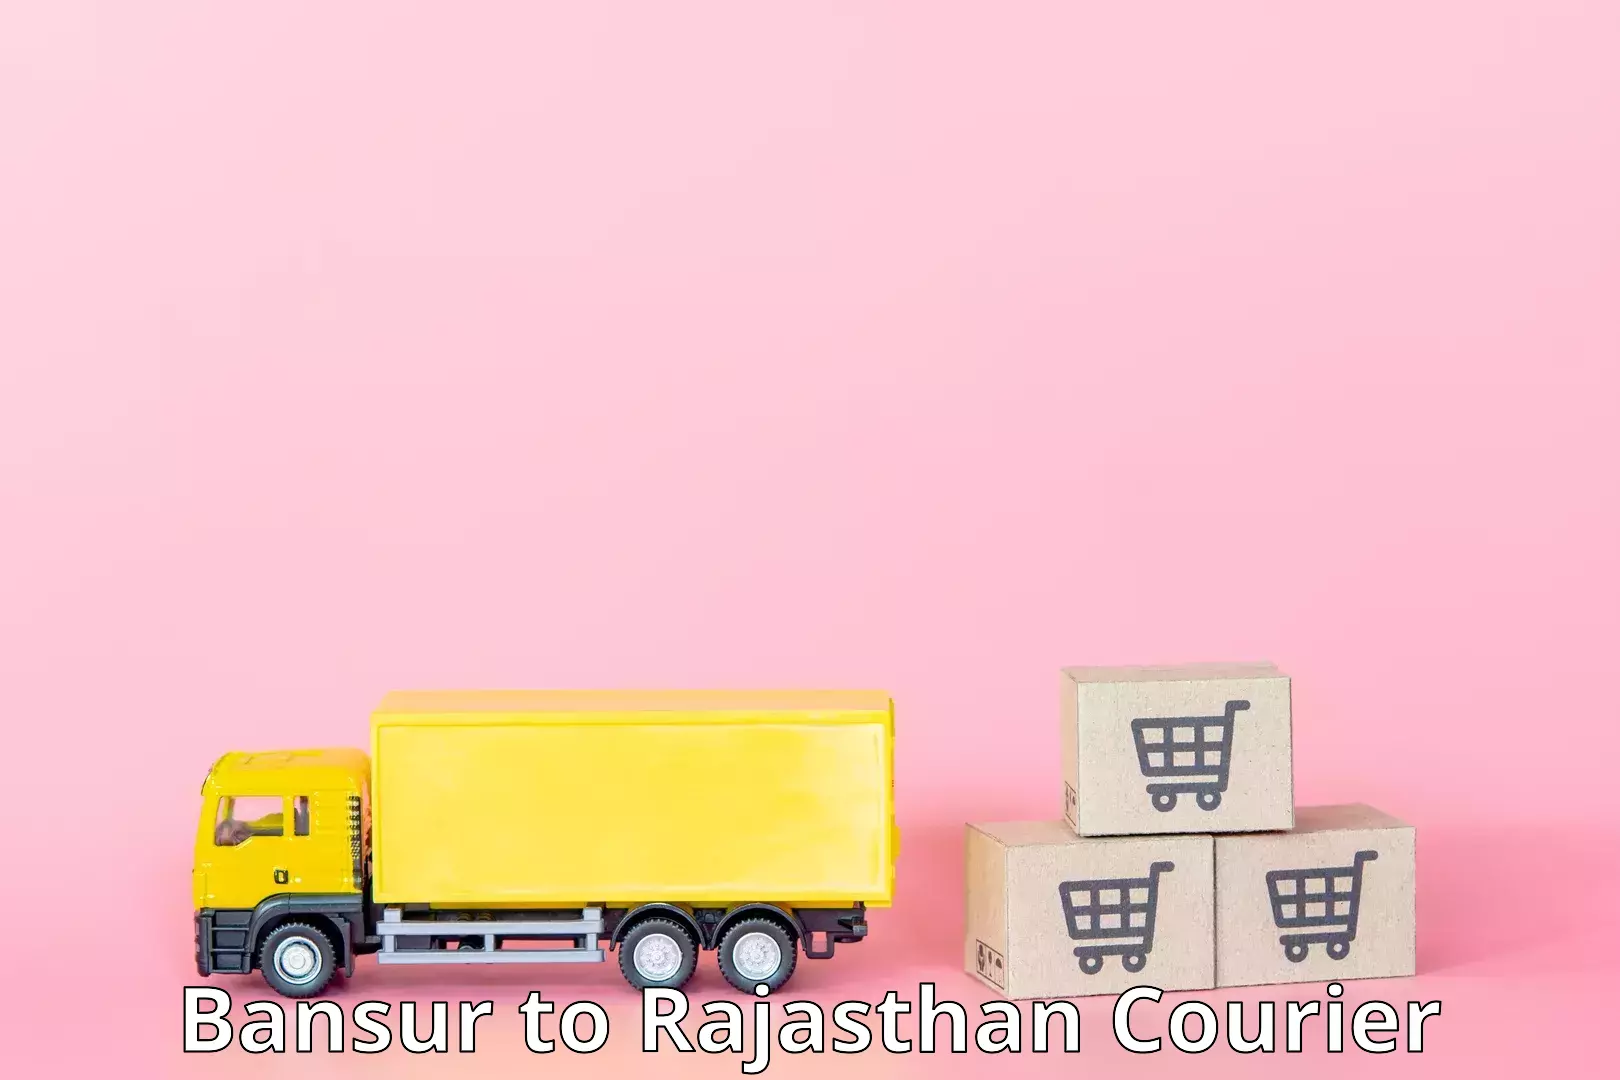 Full-service courier options Bansur to Rajasthan